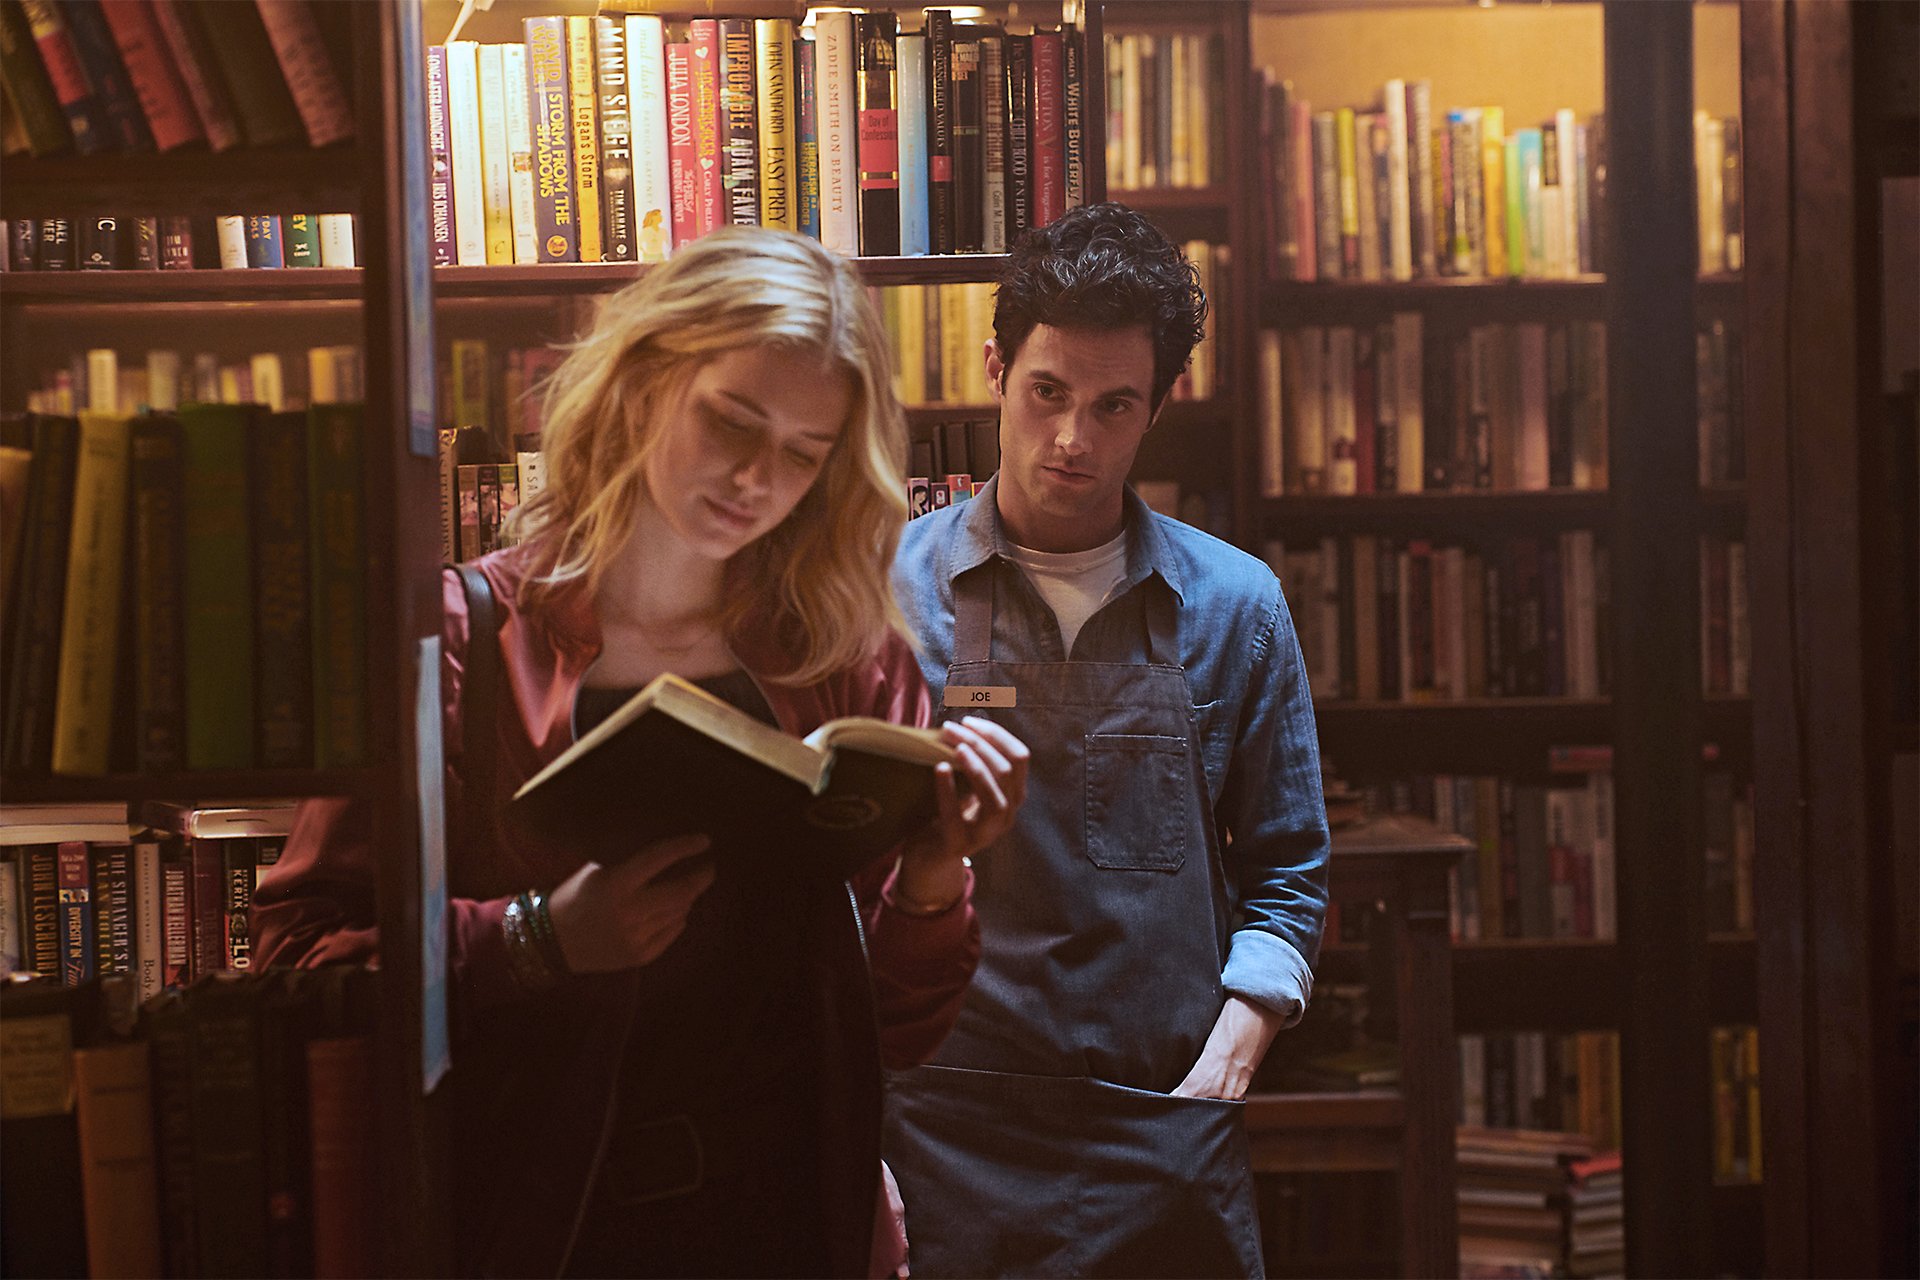 Penn Badgley and Elizabeth Lail in a bookstore in 'You'